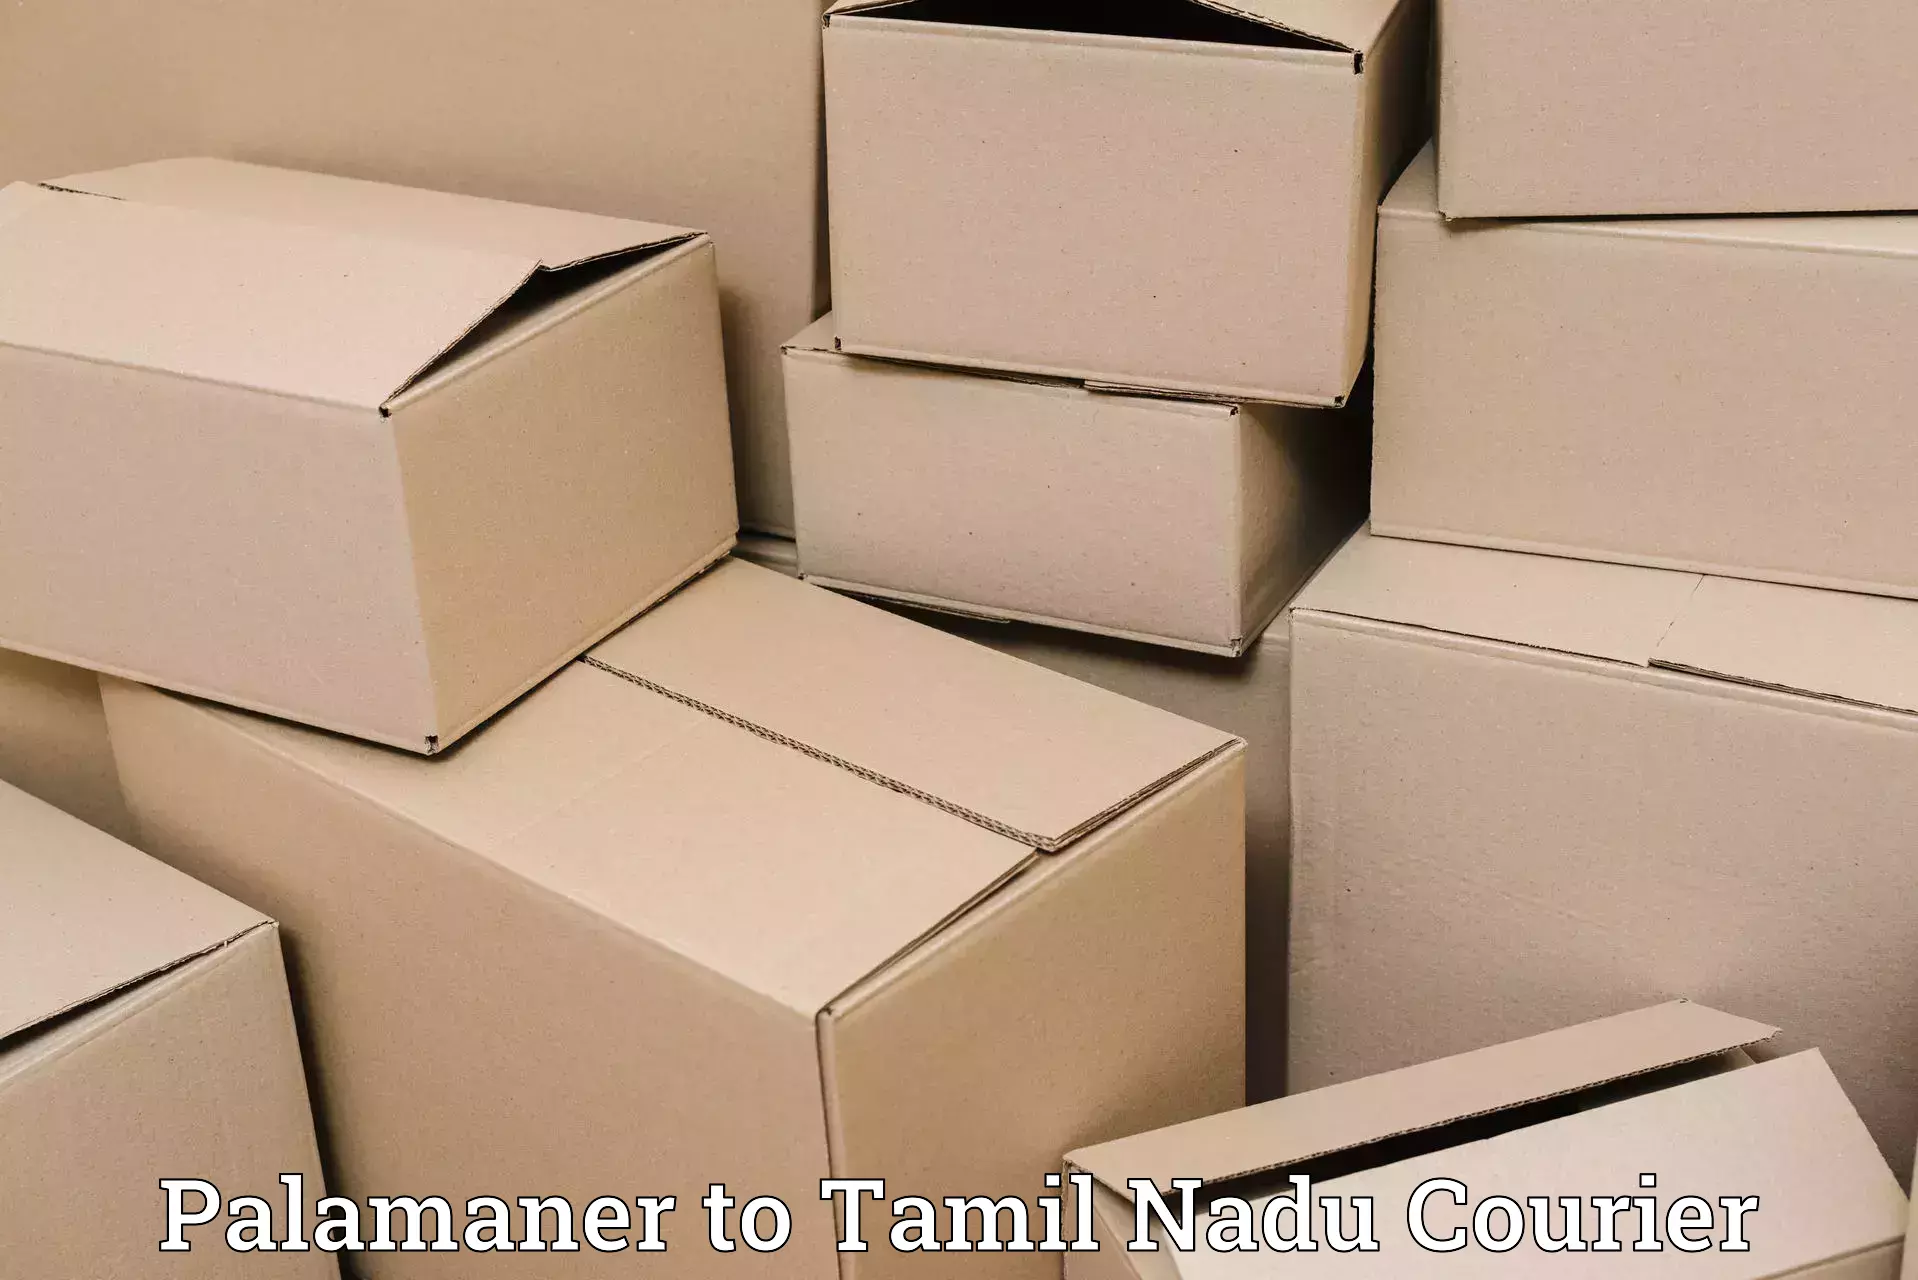 Express delivery capabilities Palamaner to Tamil Nadu